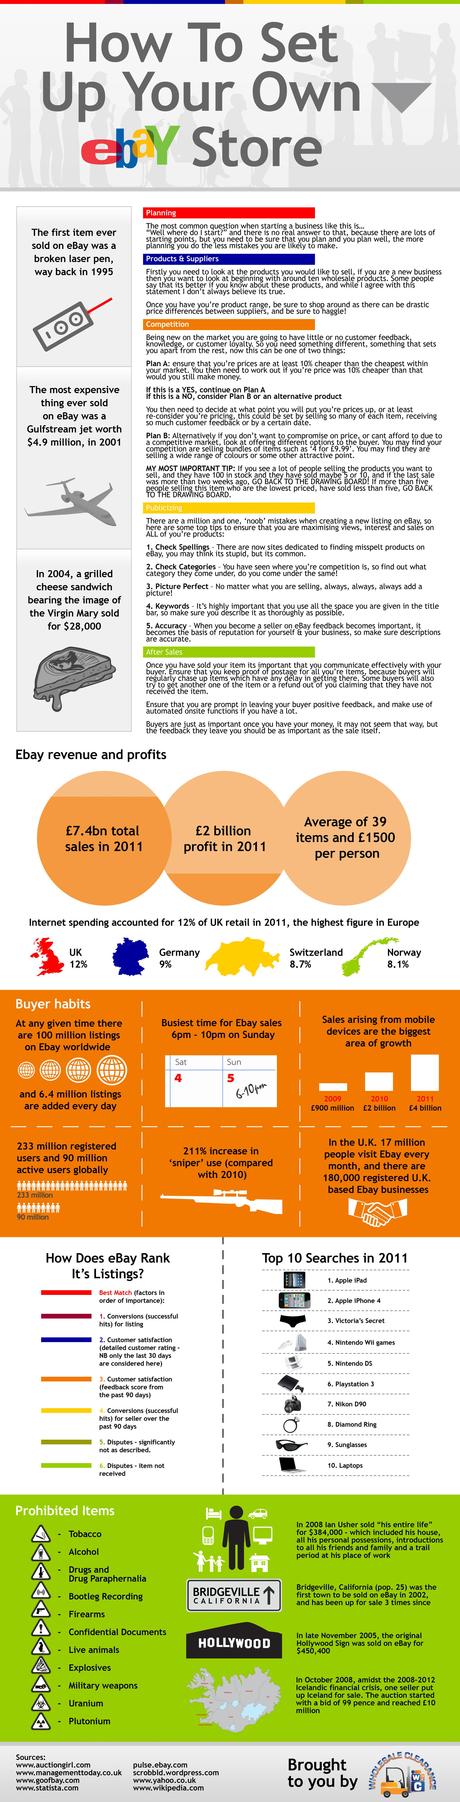 Infographic on Setting Up An Ebay Store